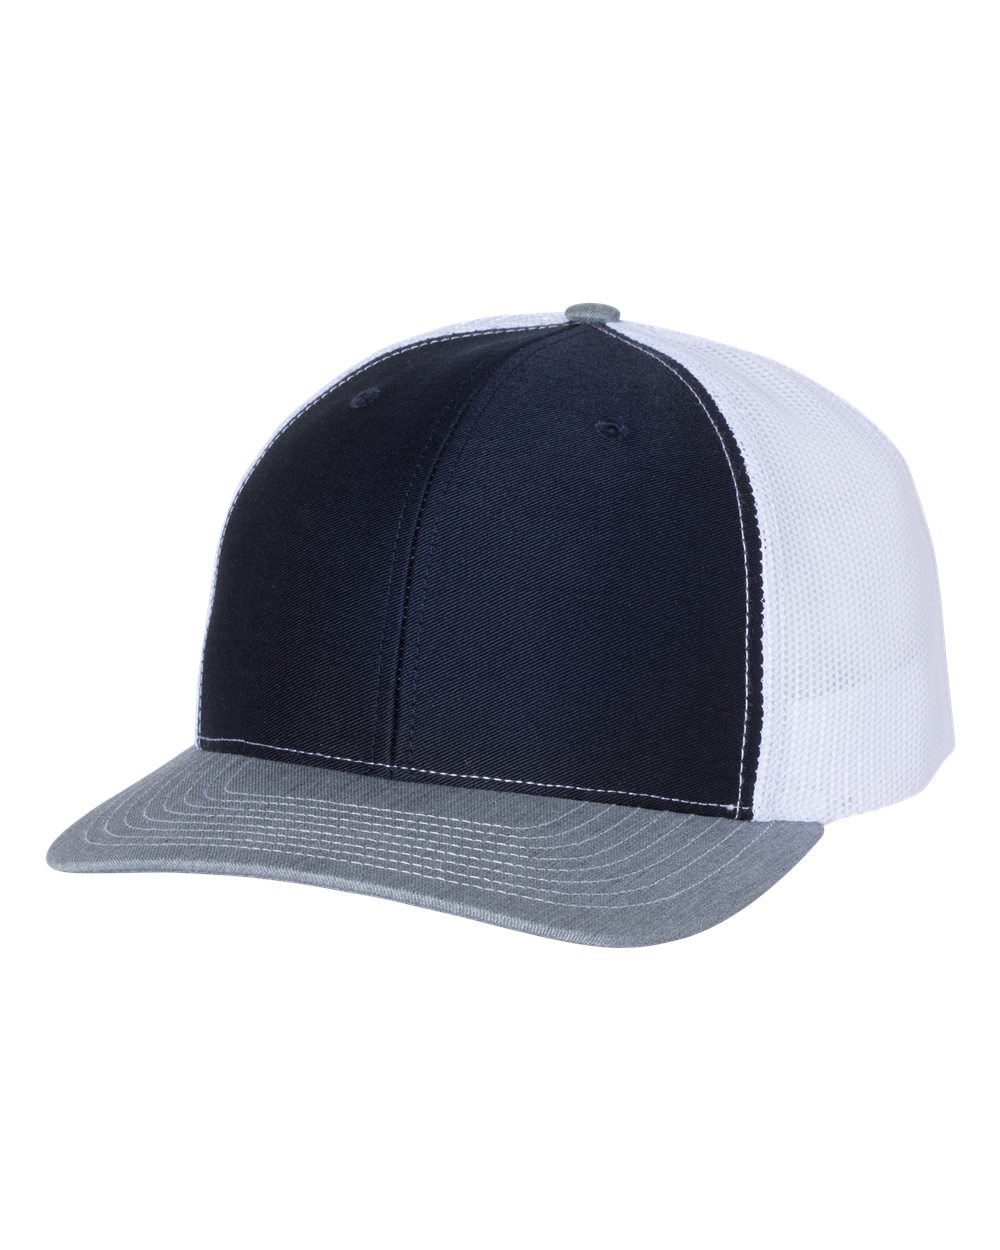 click to view Navy/ White/ Heather Grey